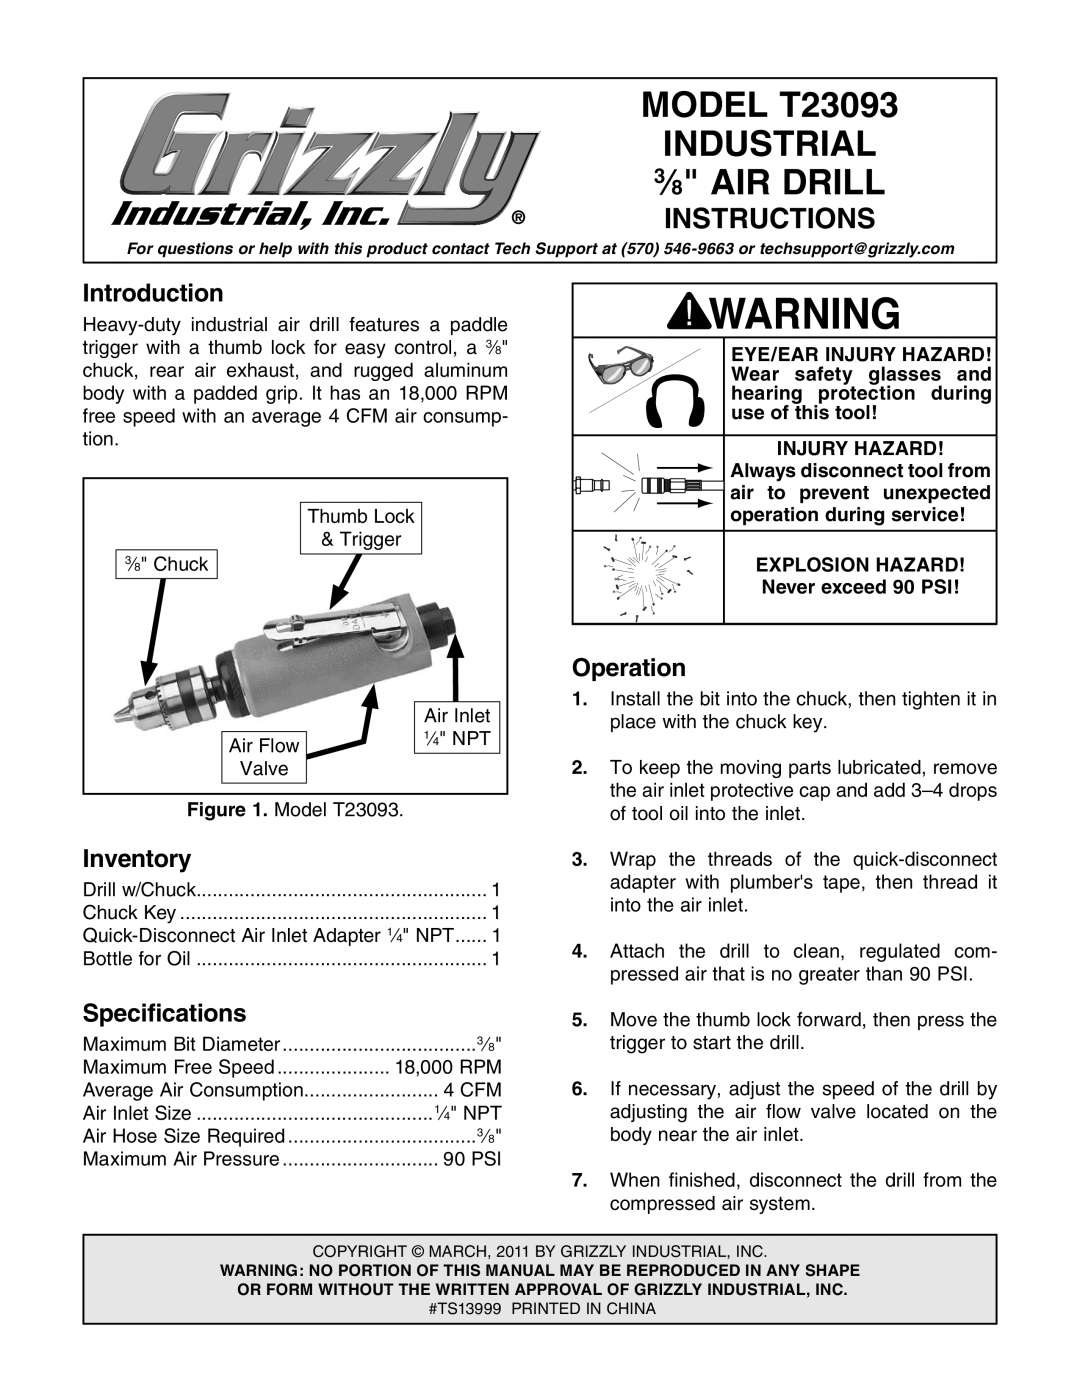 Grizzly specifications MODEL T23093, Industrial, 3⁄8 AIR DRILL, Instructions, Introduction, Inventory, Specifications 